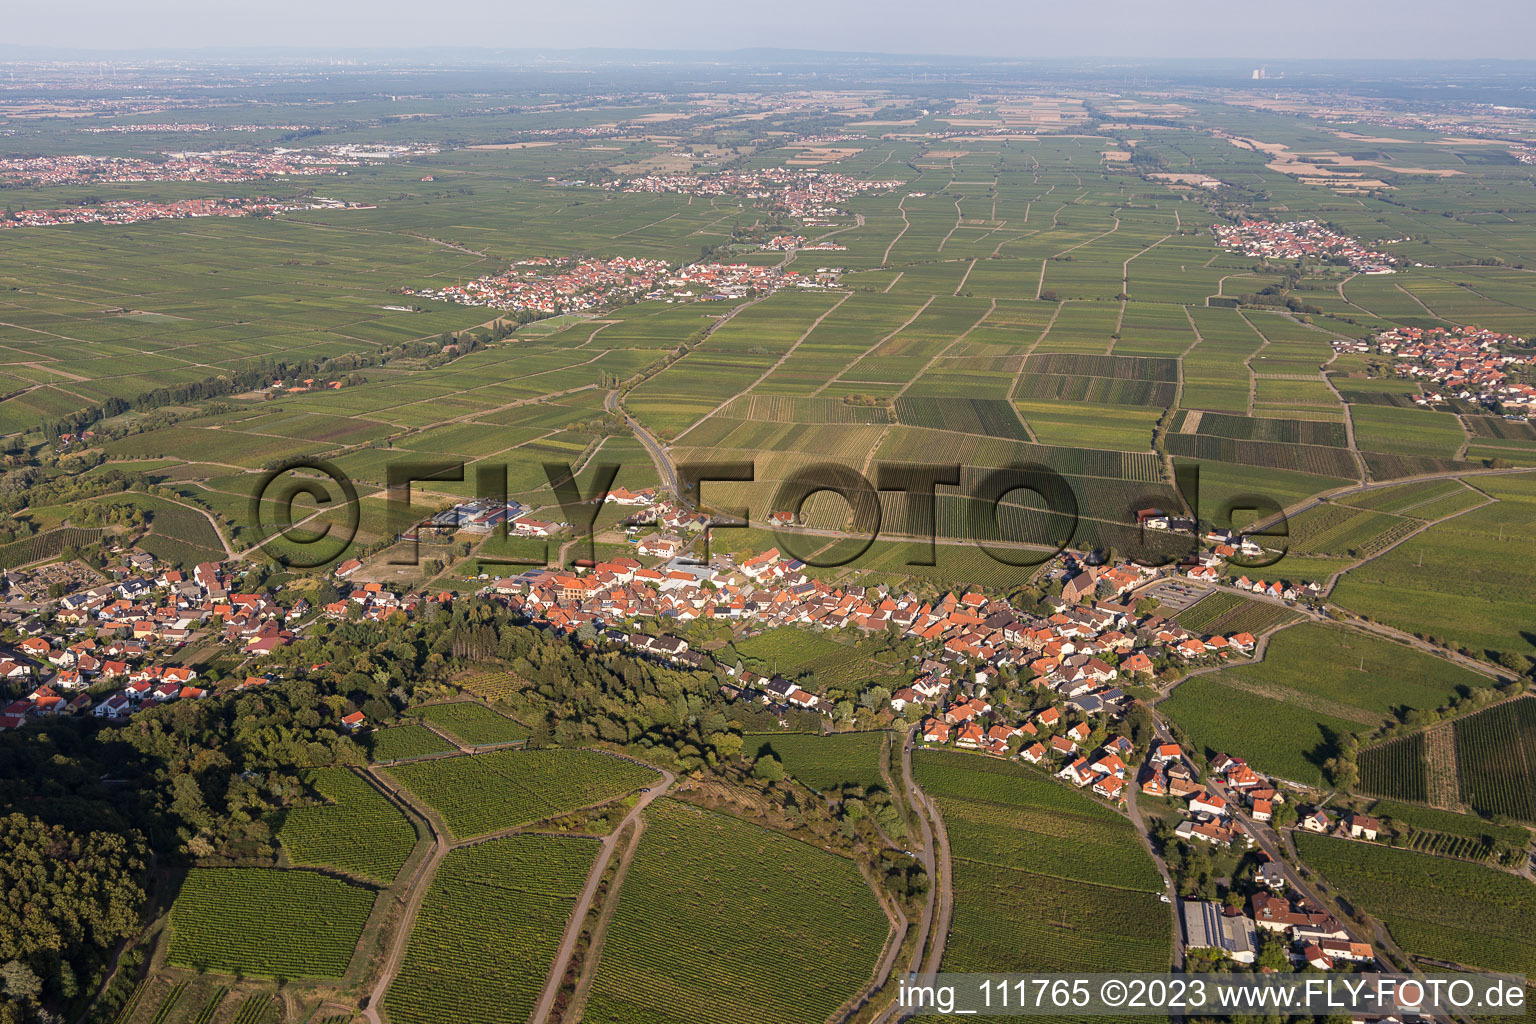 Burrweiler in the state Rhineland-Palatinate, Germany from above